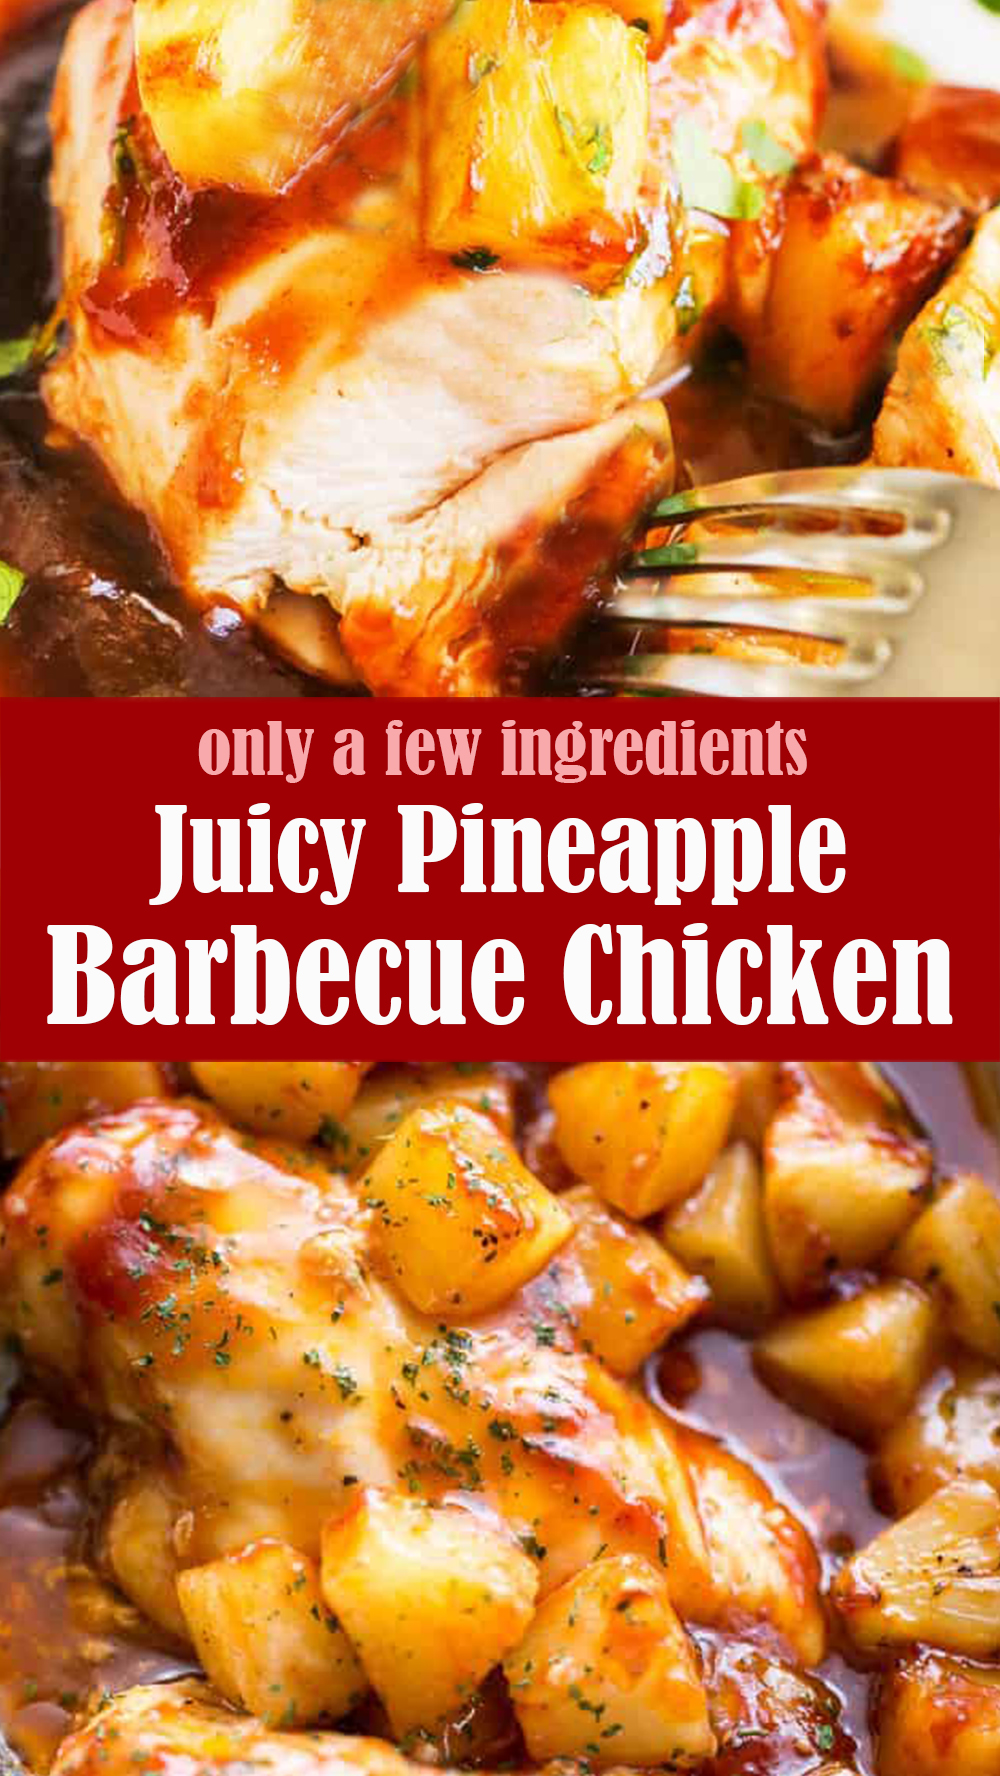 Juicy Pineapple Barbecue Chicken Recipe